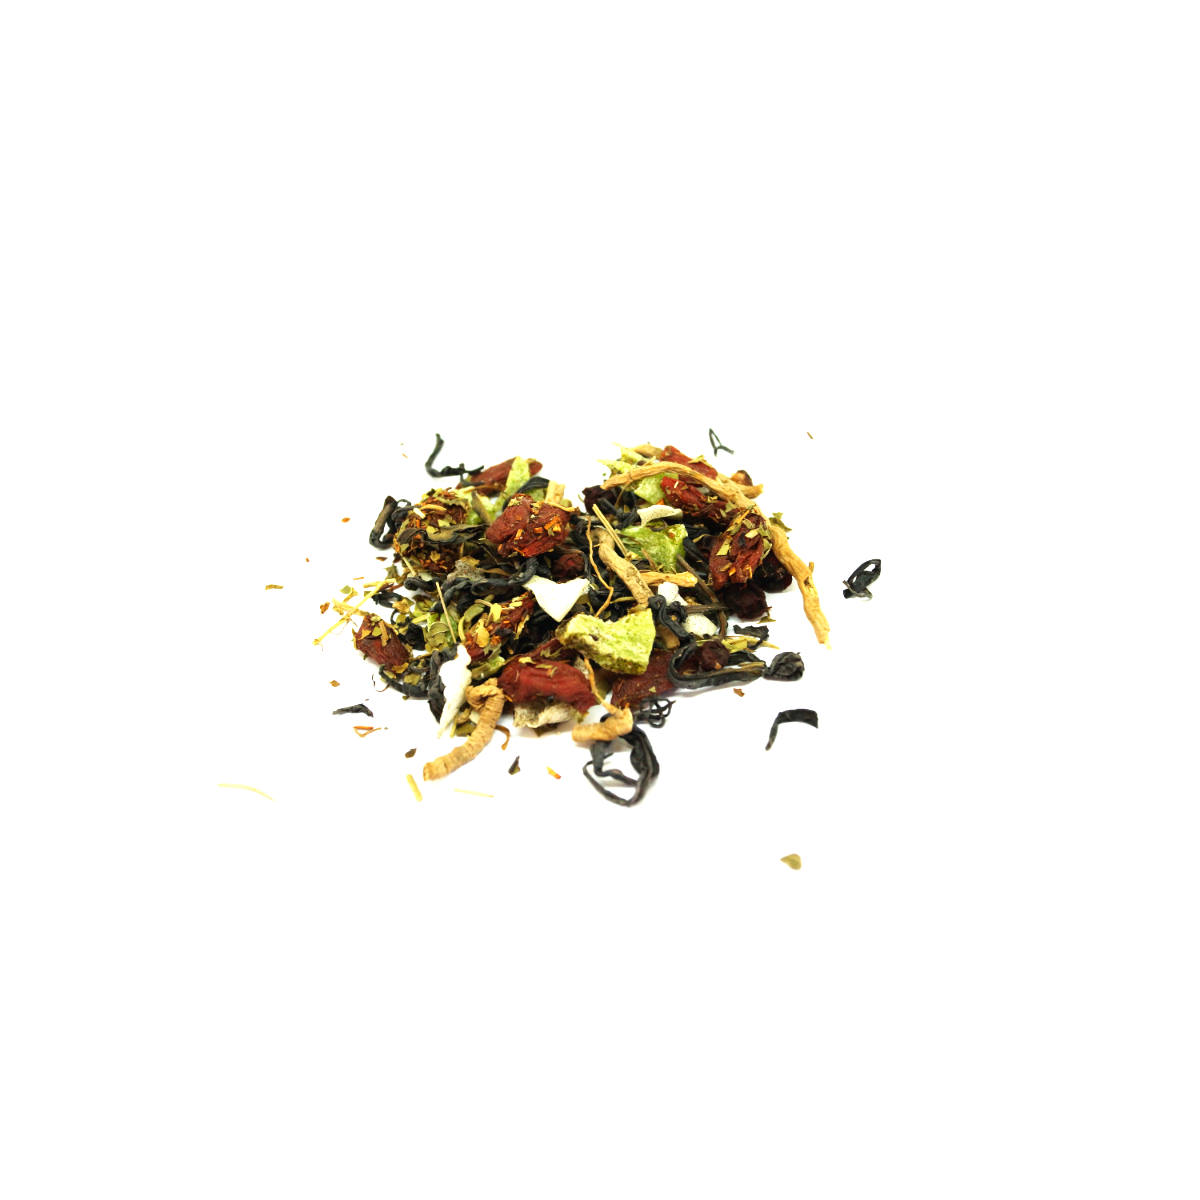 Cup of Ambition Tea We also added the fruit of Kiwi to give it a great flavorful taste combined with Coconut to round out the earthy-ness of the Polygala.